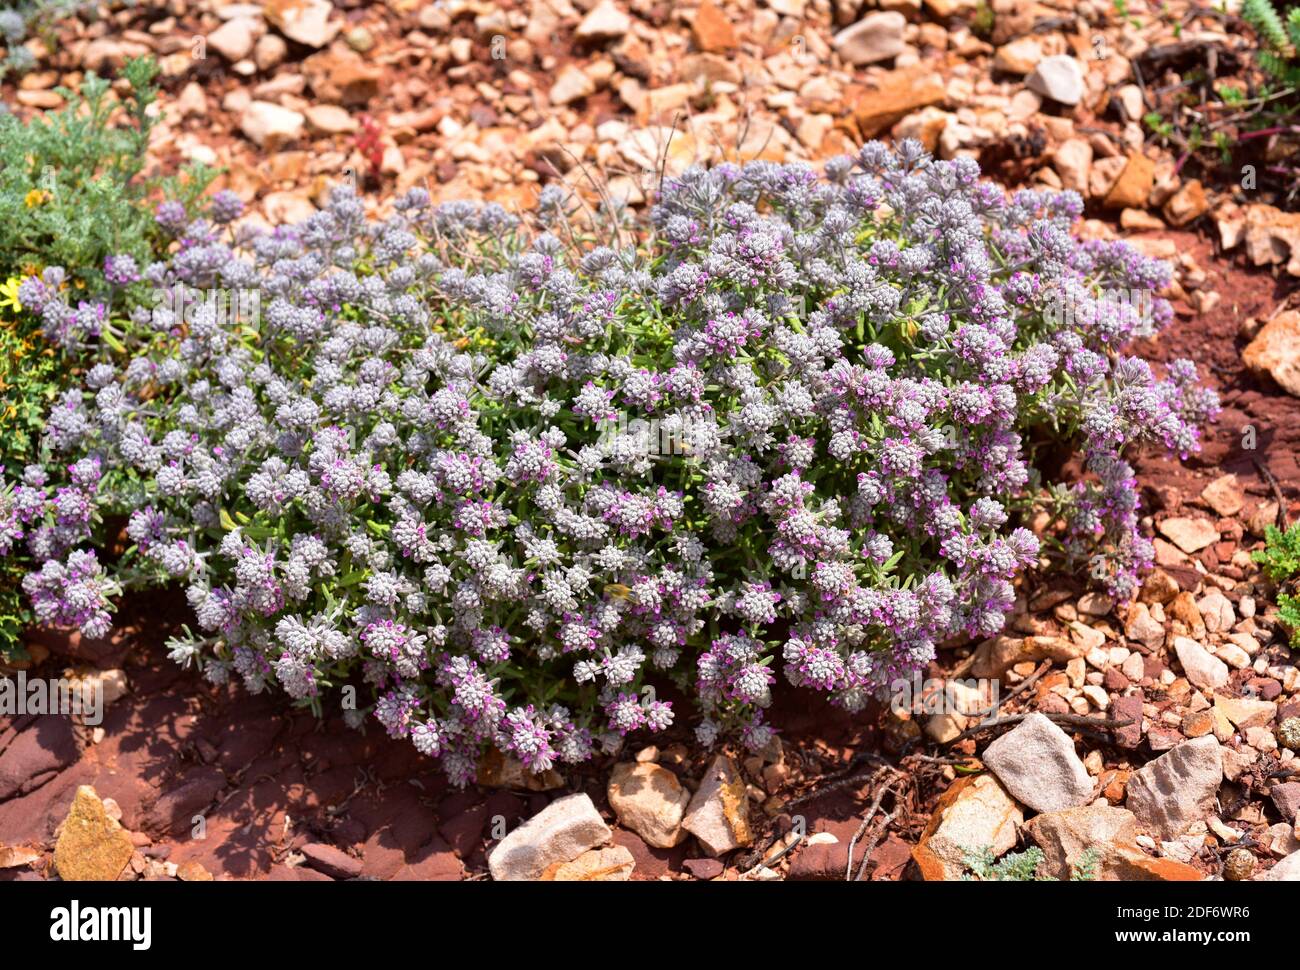 Tomillo blanco or tomillo macho (Teucrium capitatum) is a perennial subshrub native to Meditarranean Basin and western Asia. This photo was taken in Stock Photo